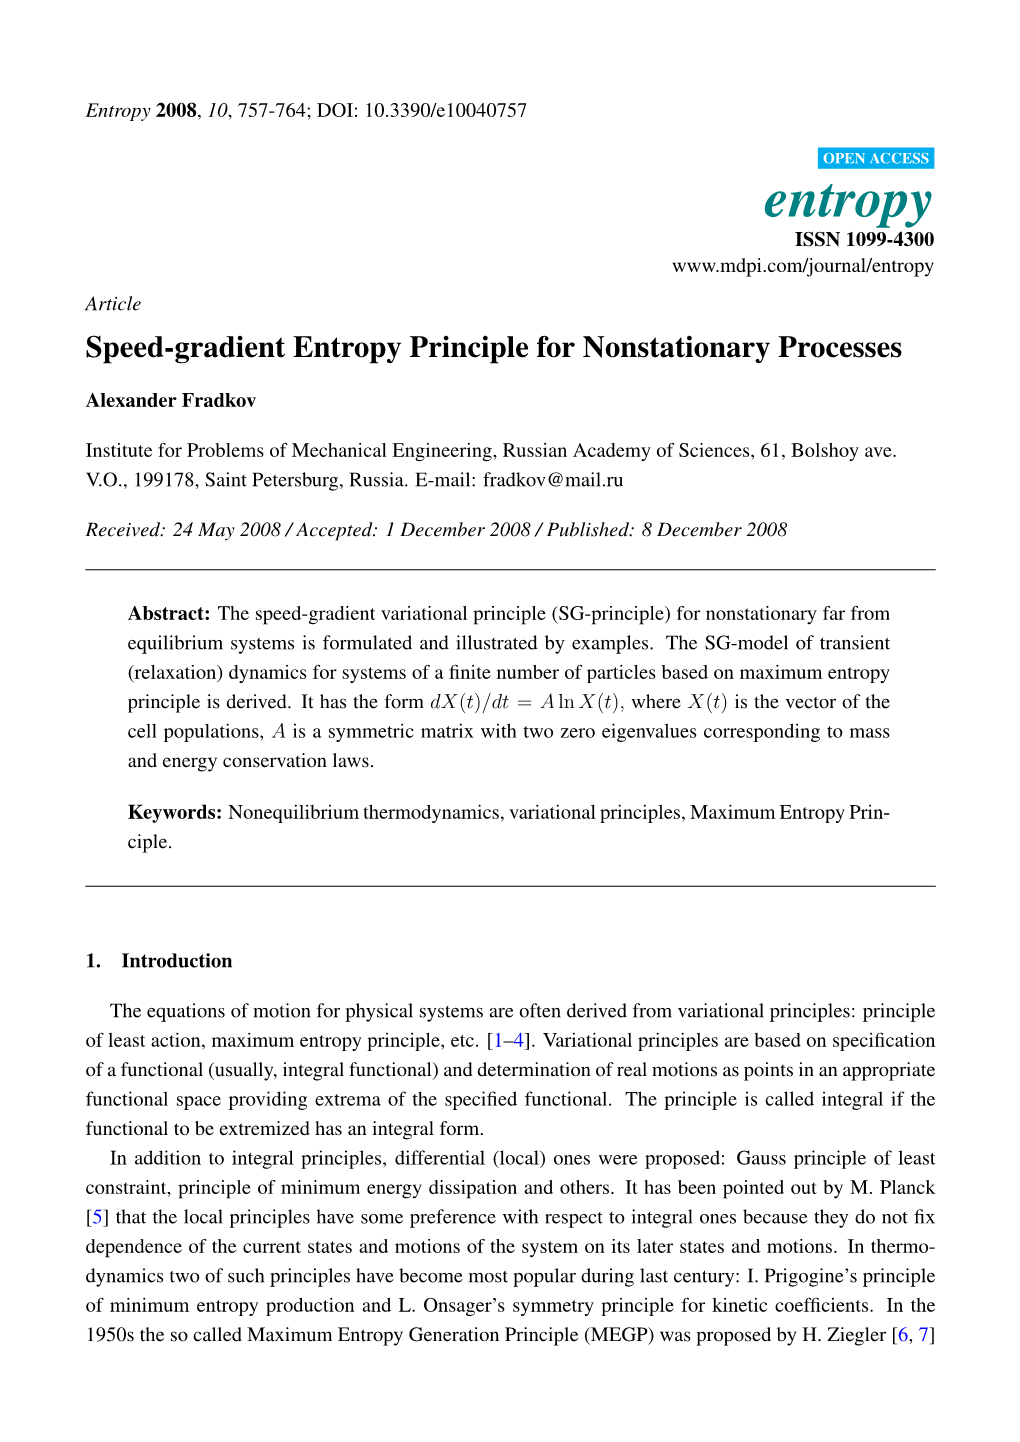 Speed-Gradient Entropy Principle for Nonstationary Processes